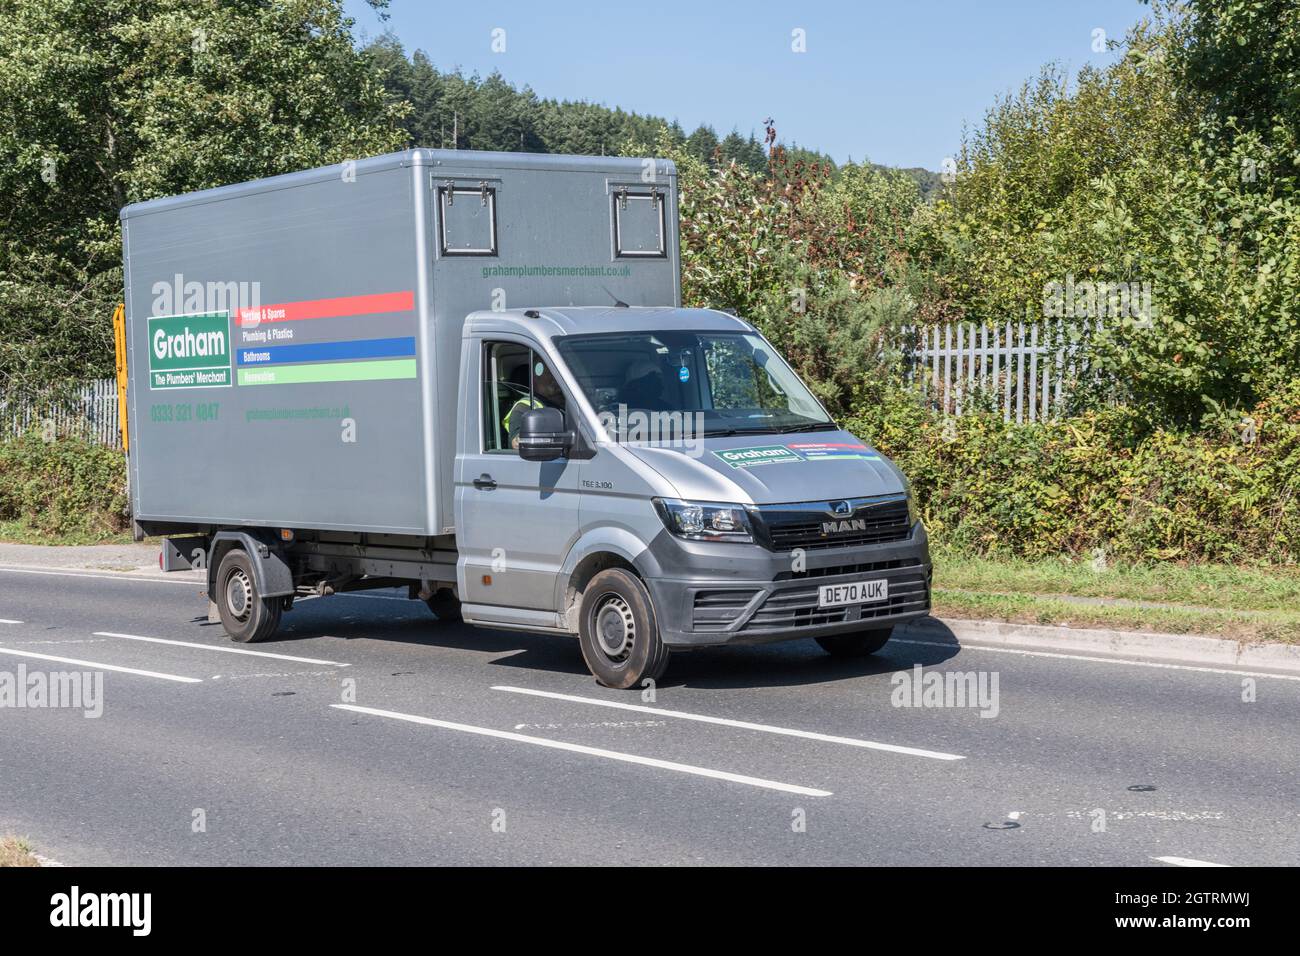 Graham plumbing supplies / merchant MAN delivery truck going uphill on country road. For UK driver shortage, goods delivery during Covid, UK transport Stock Photo